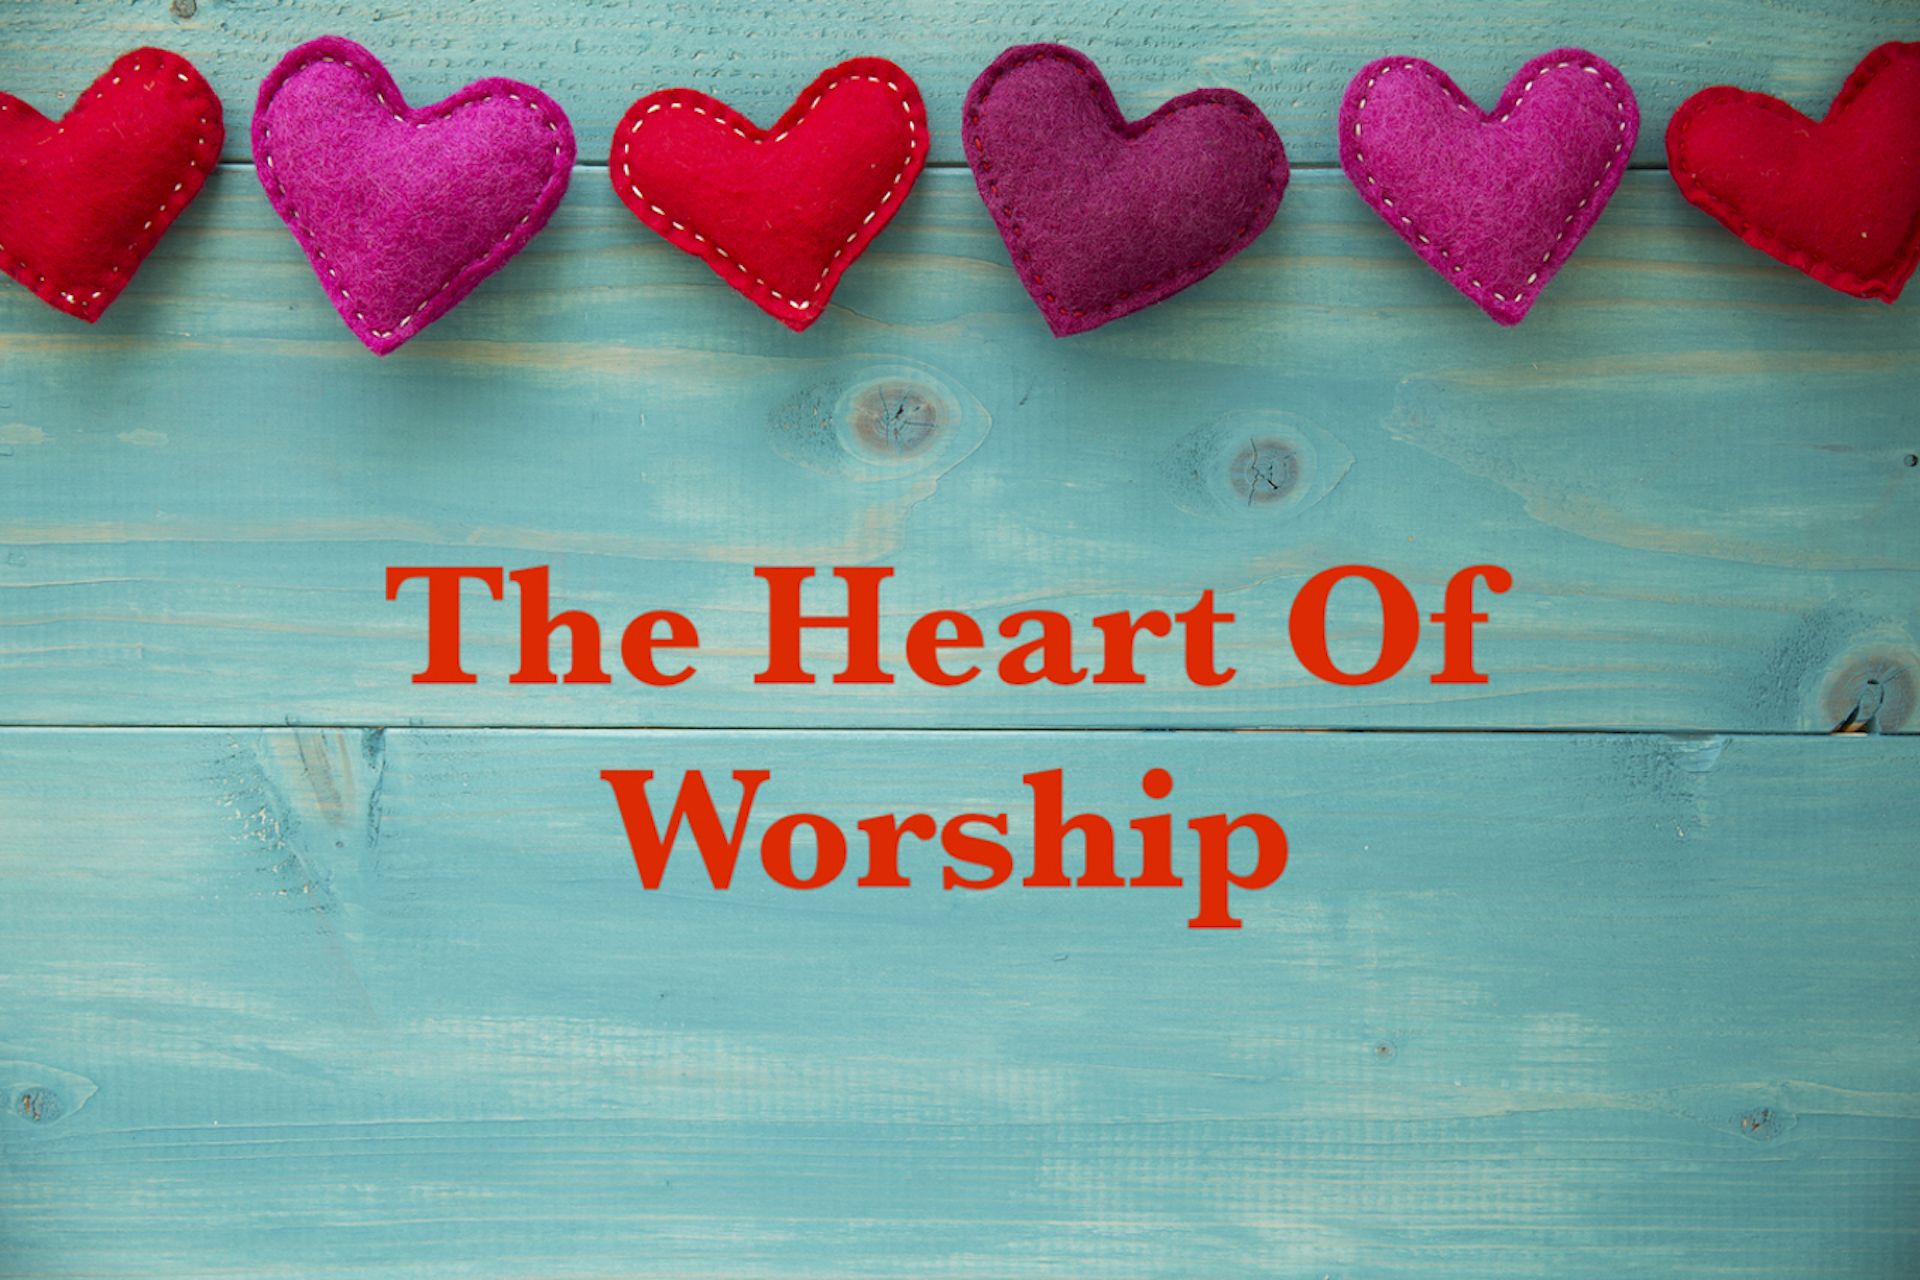 The Heart Of Worship